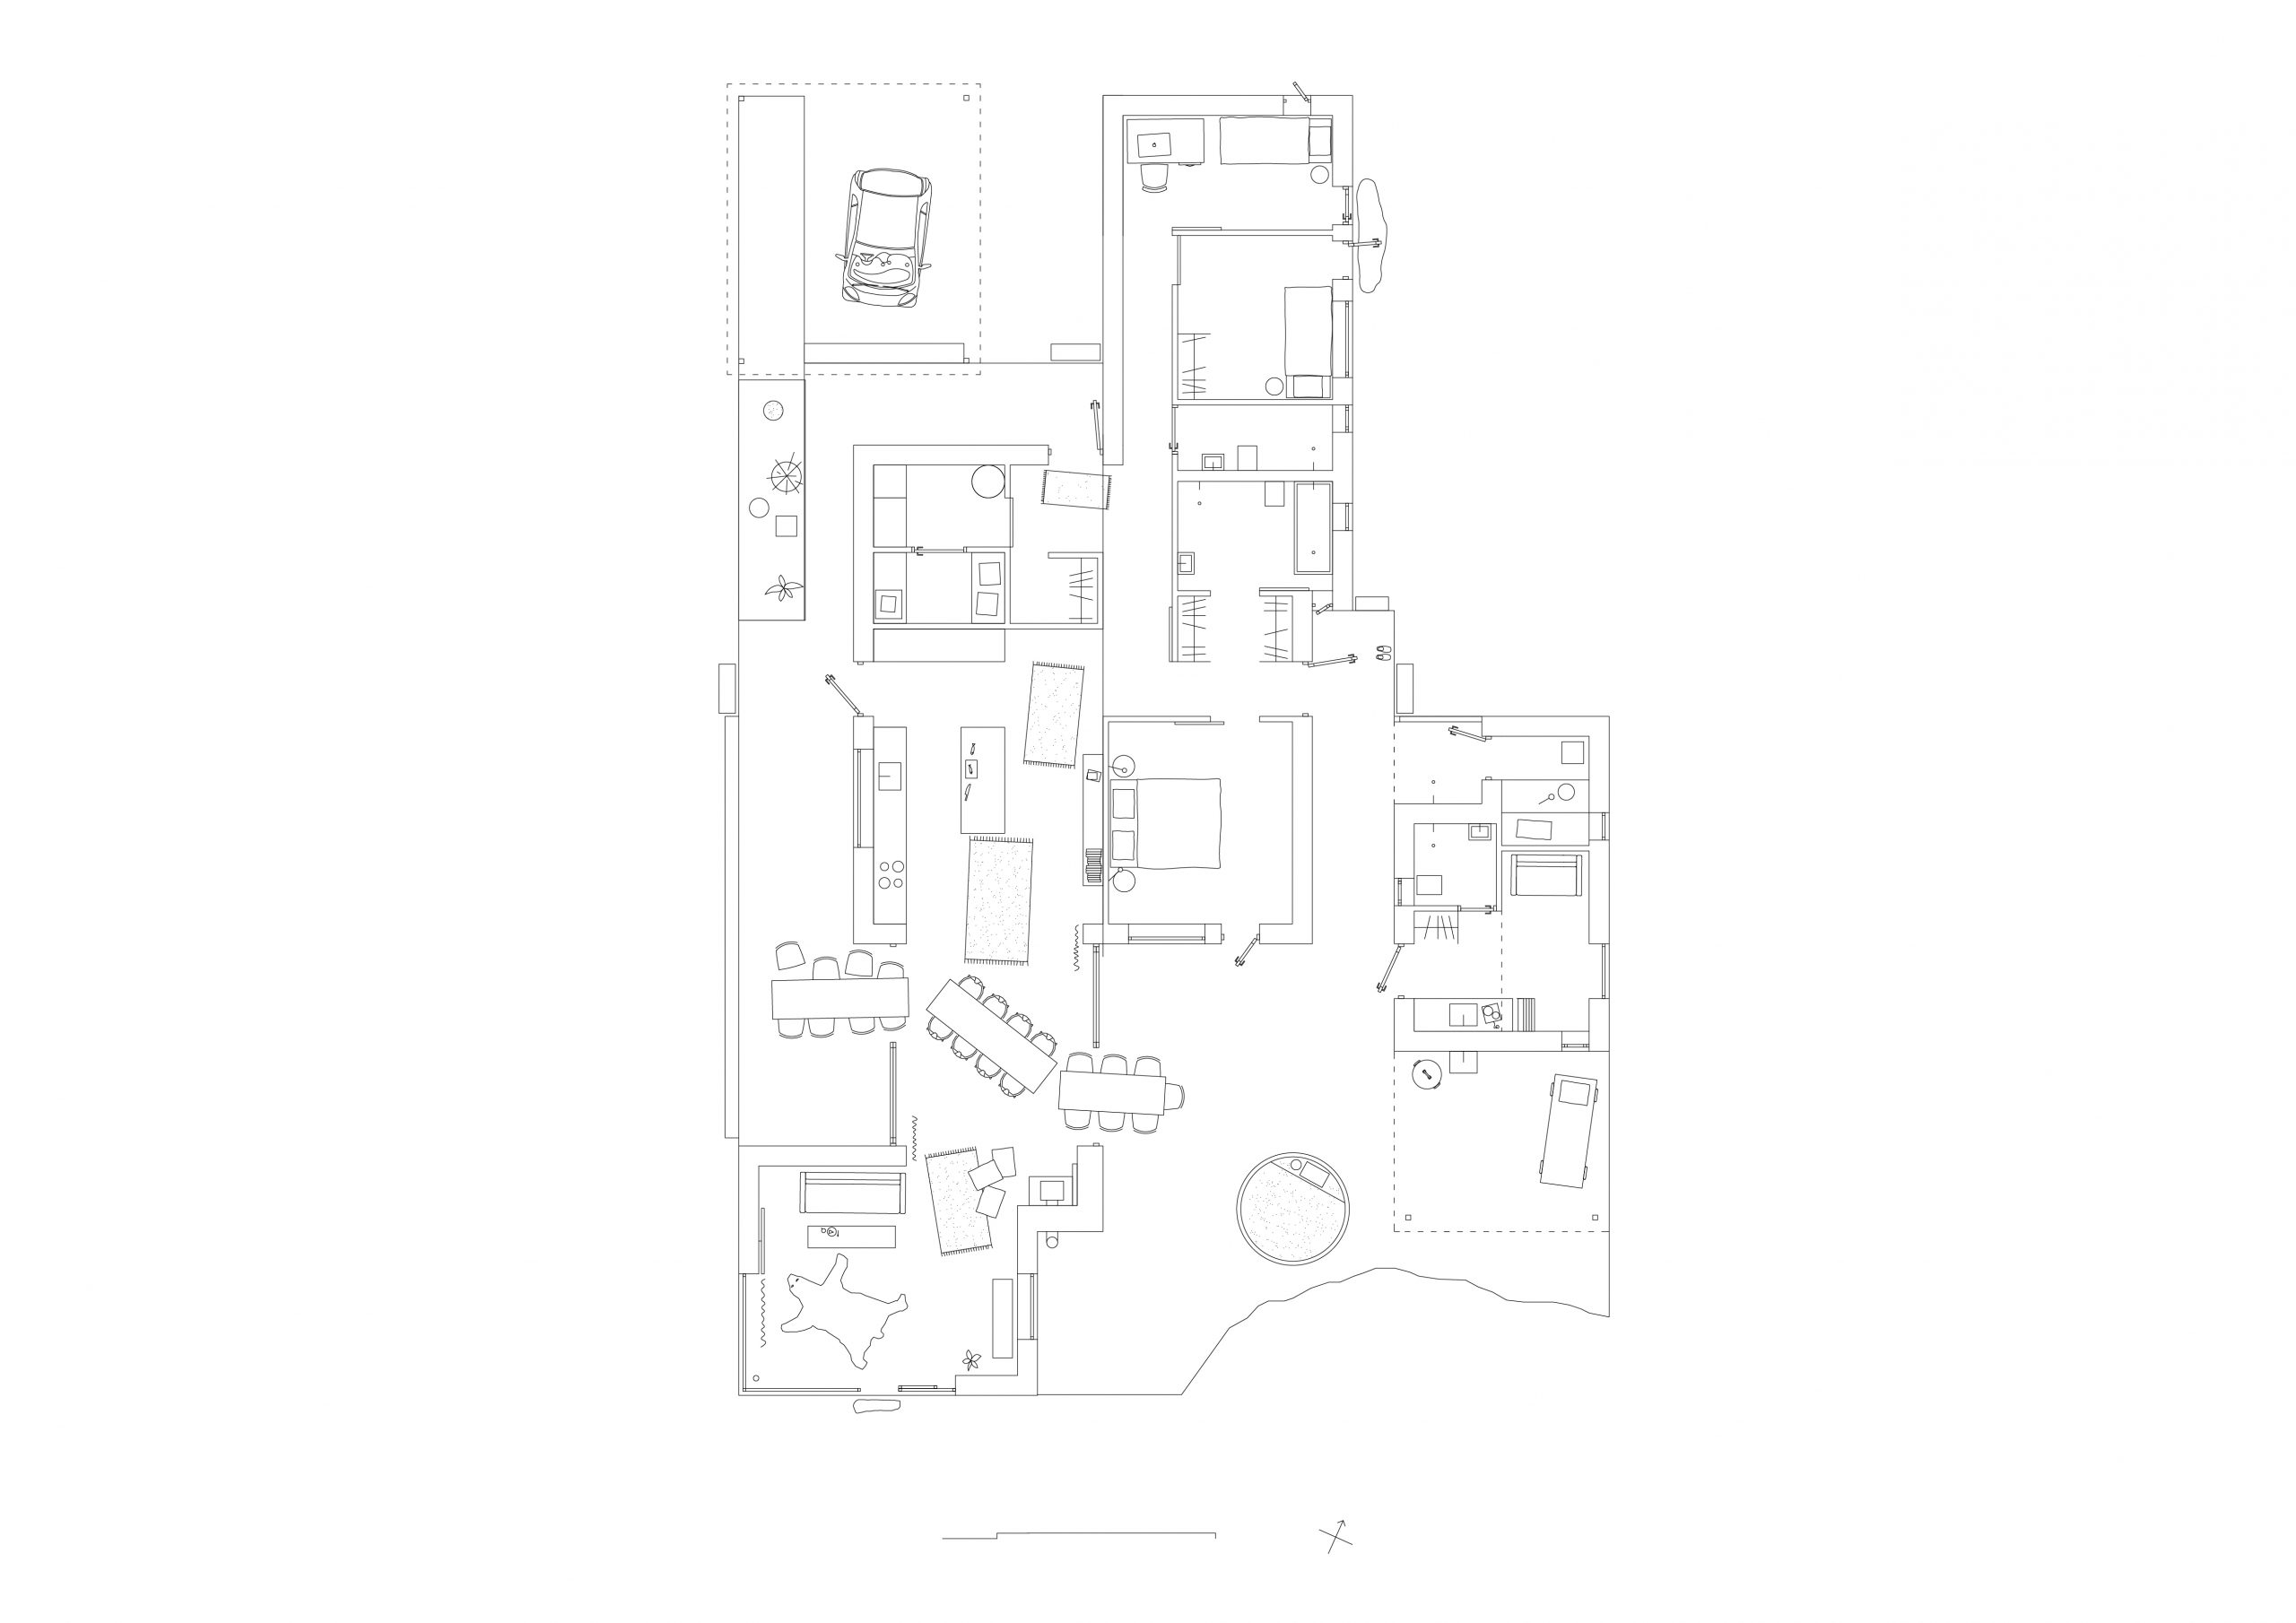 House-1_Plan 1-100 furnished